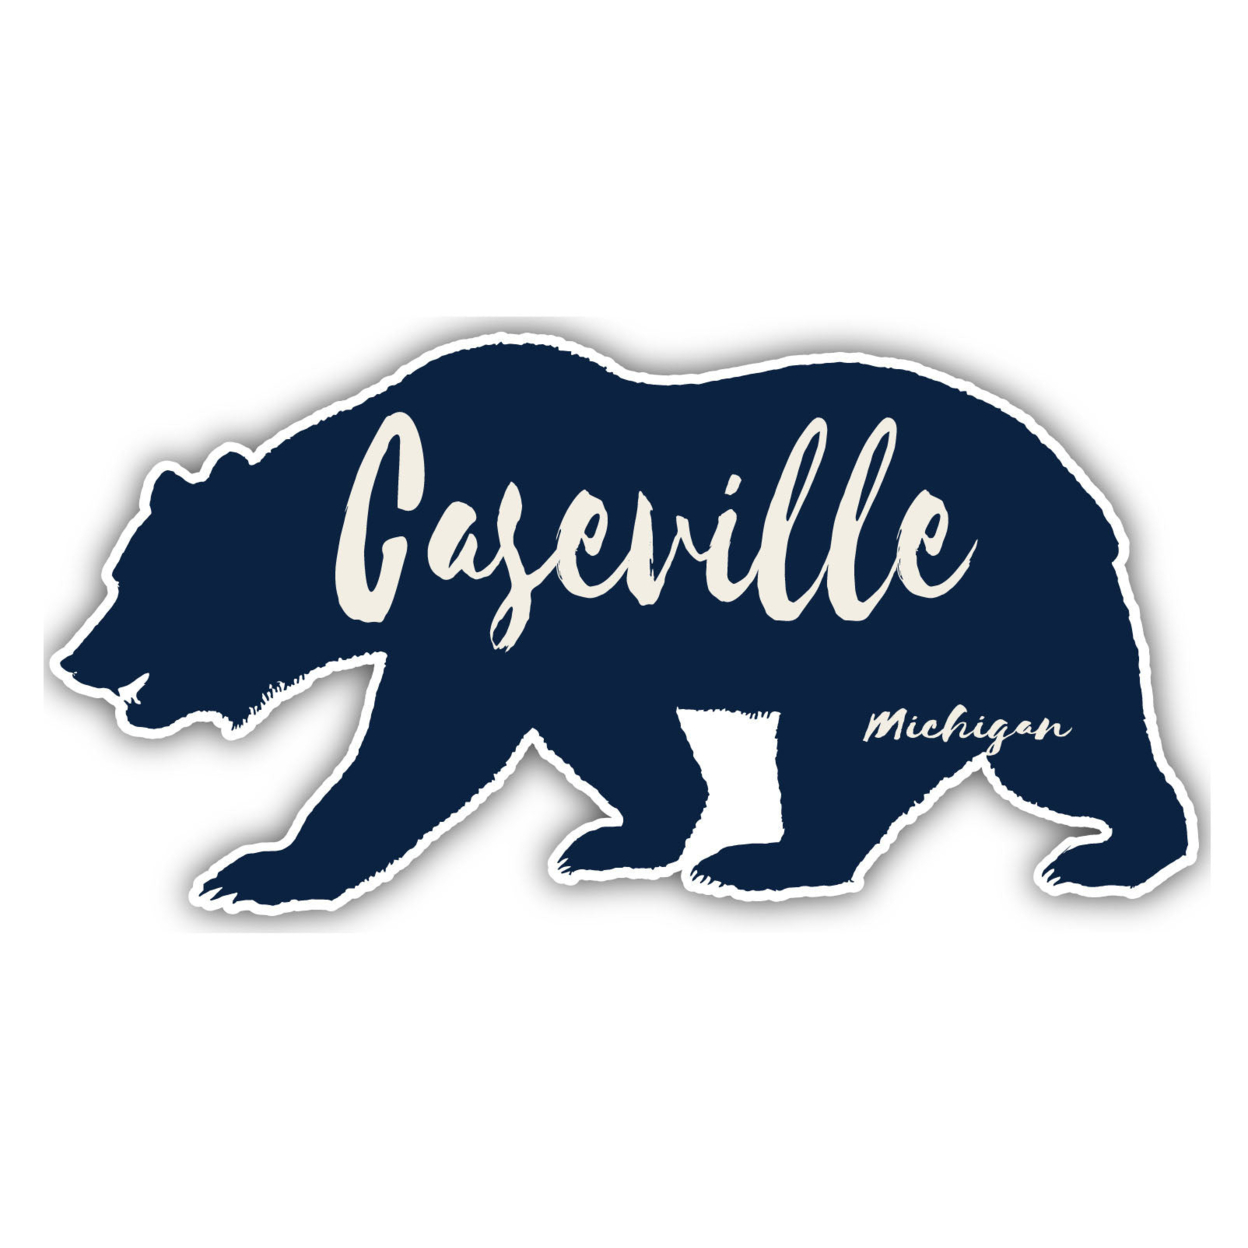 Caseville Michigan Souvenir Decorative Stickers (Choose Theme And Size) - 4-Pack, 12-Inch, Bear